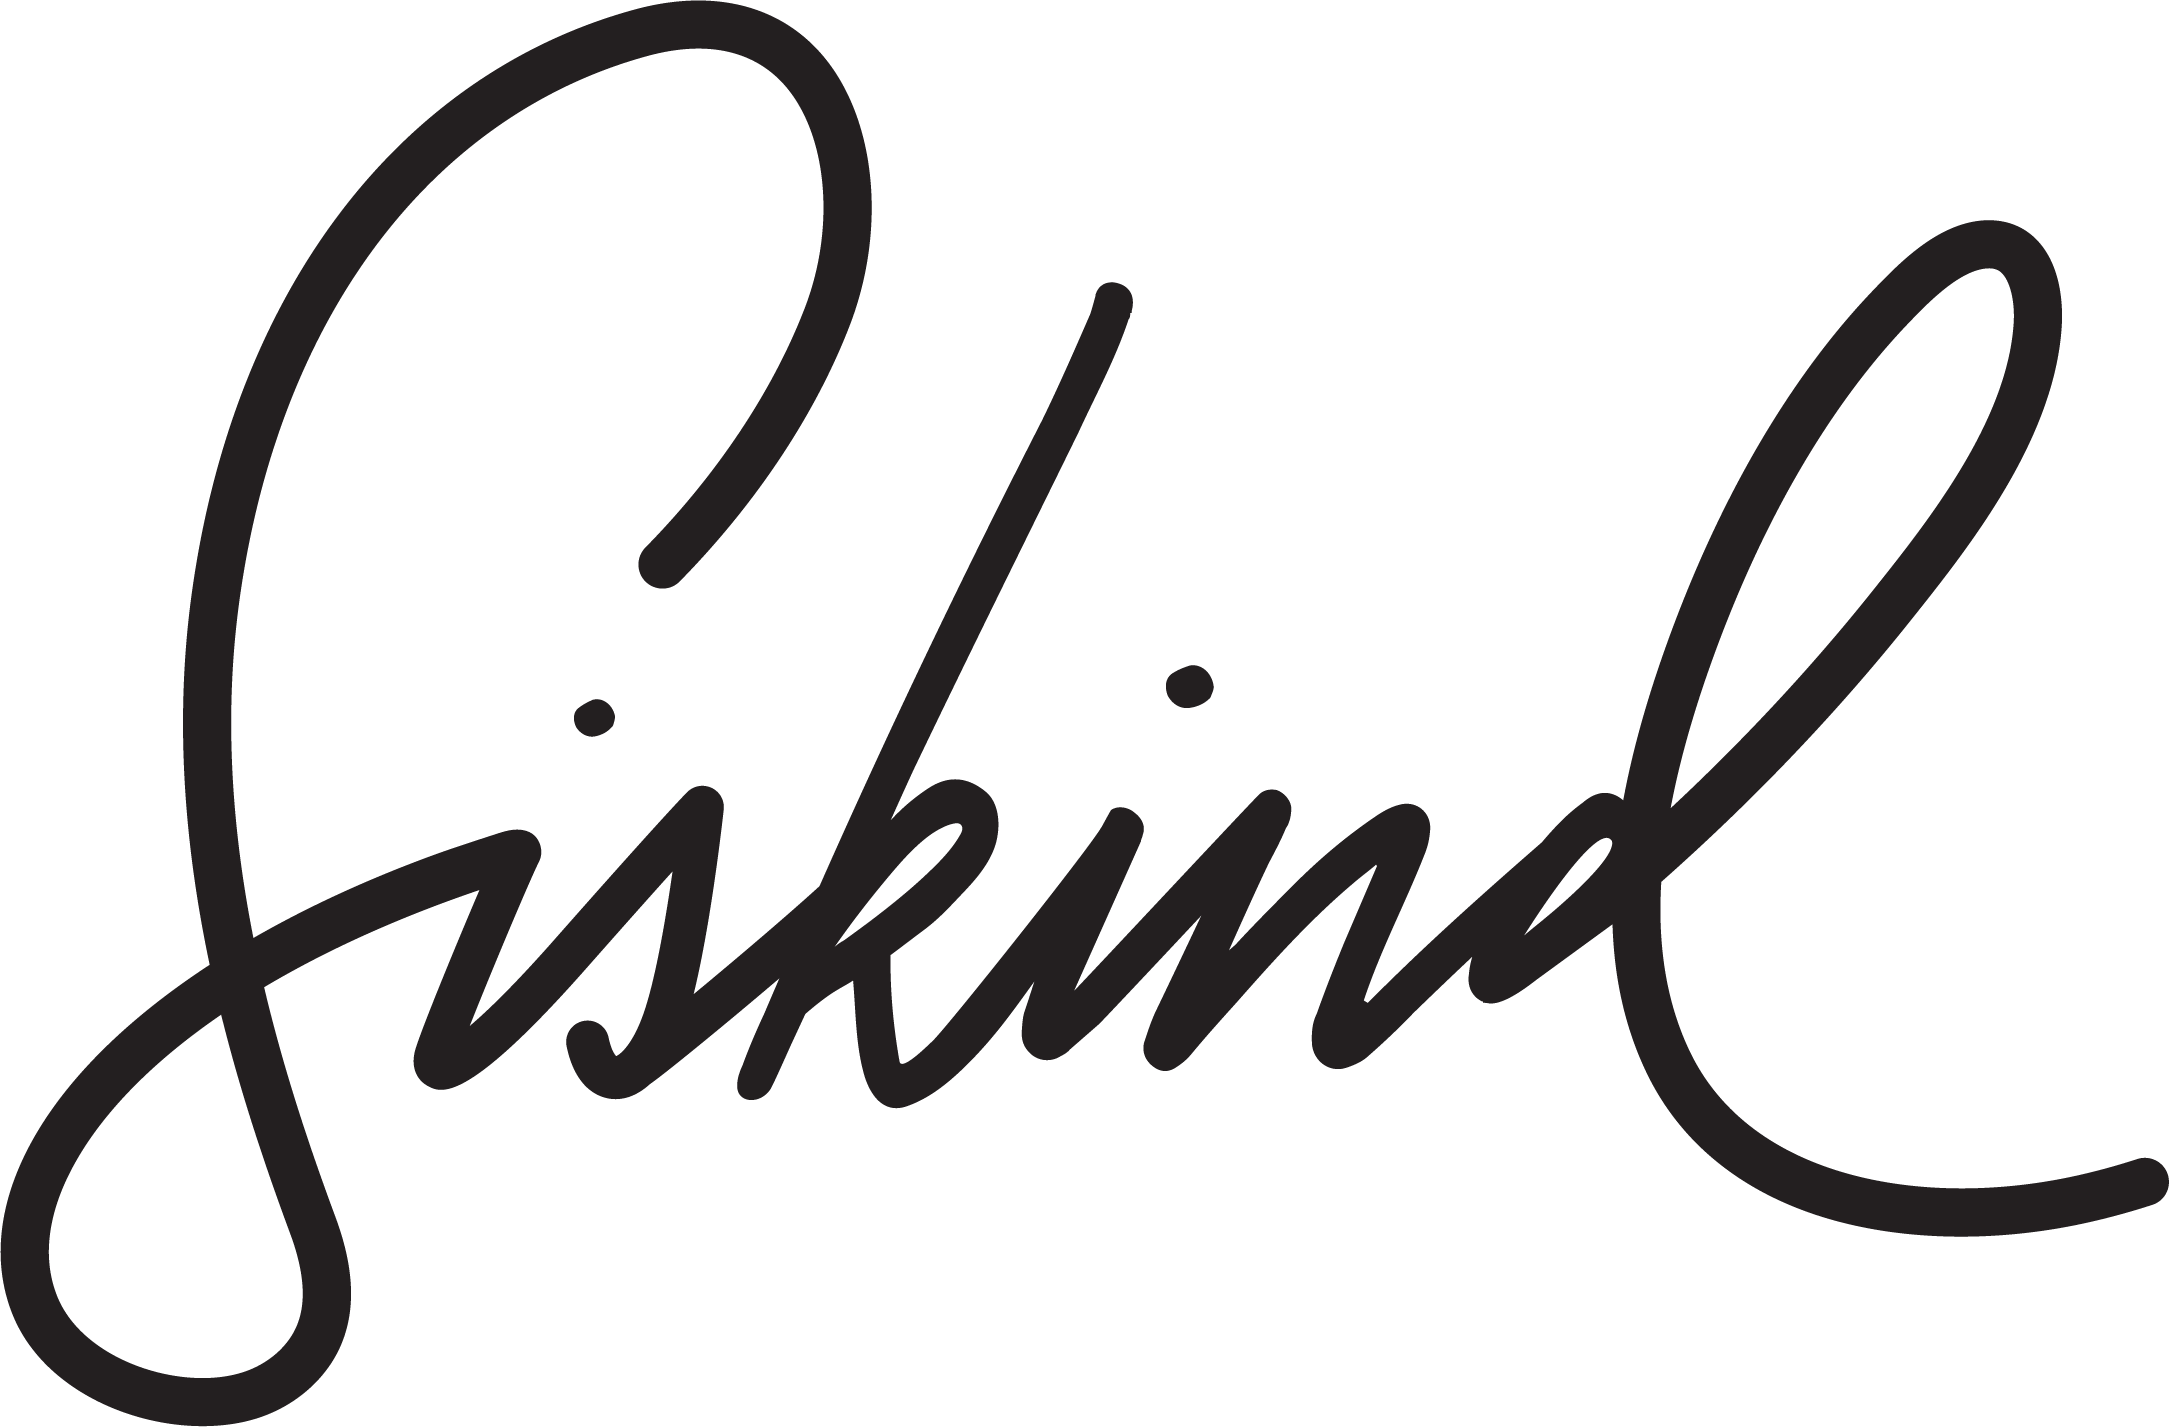 THE SISKIND GROUP